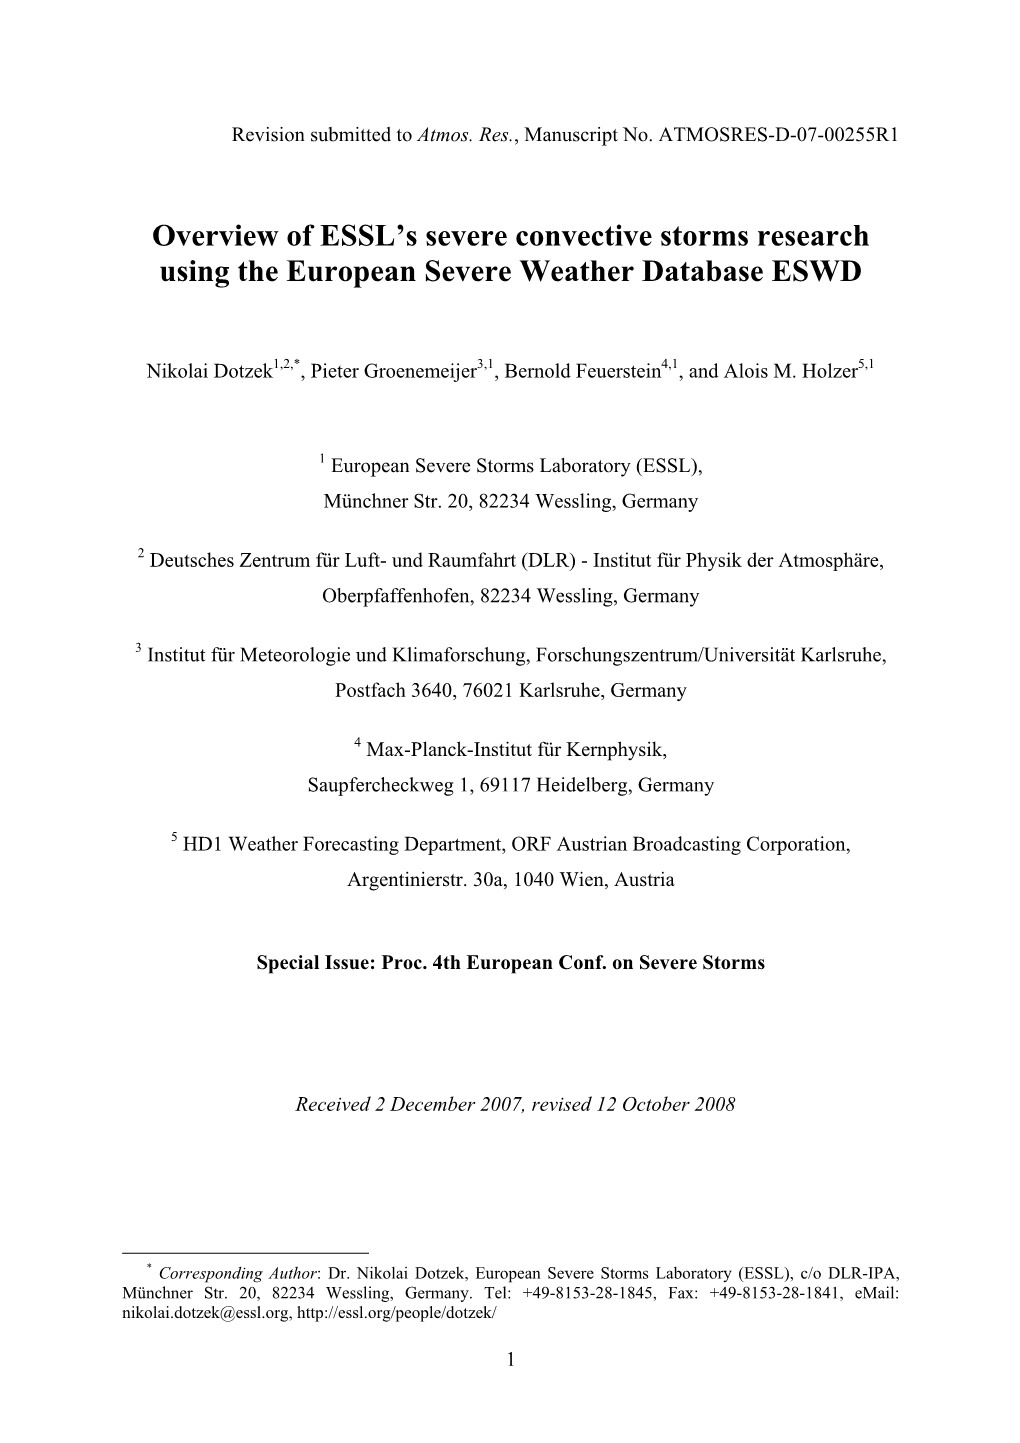 Overview of ESSL's Severe Convective Storms Research Using The